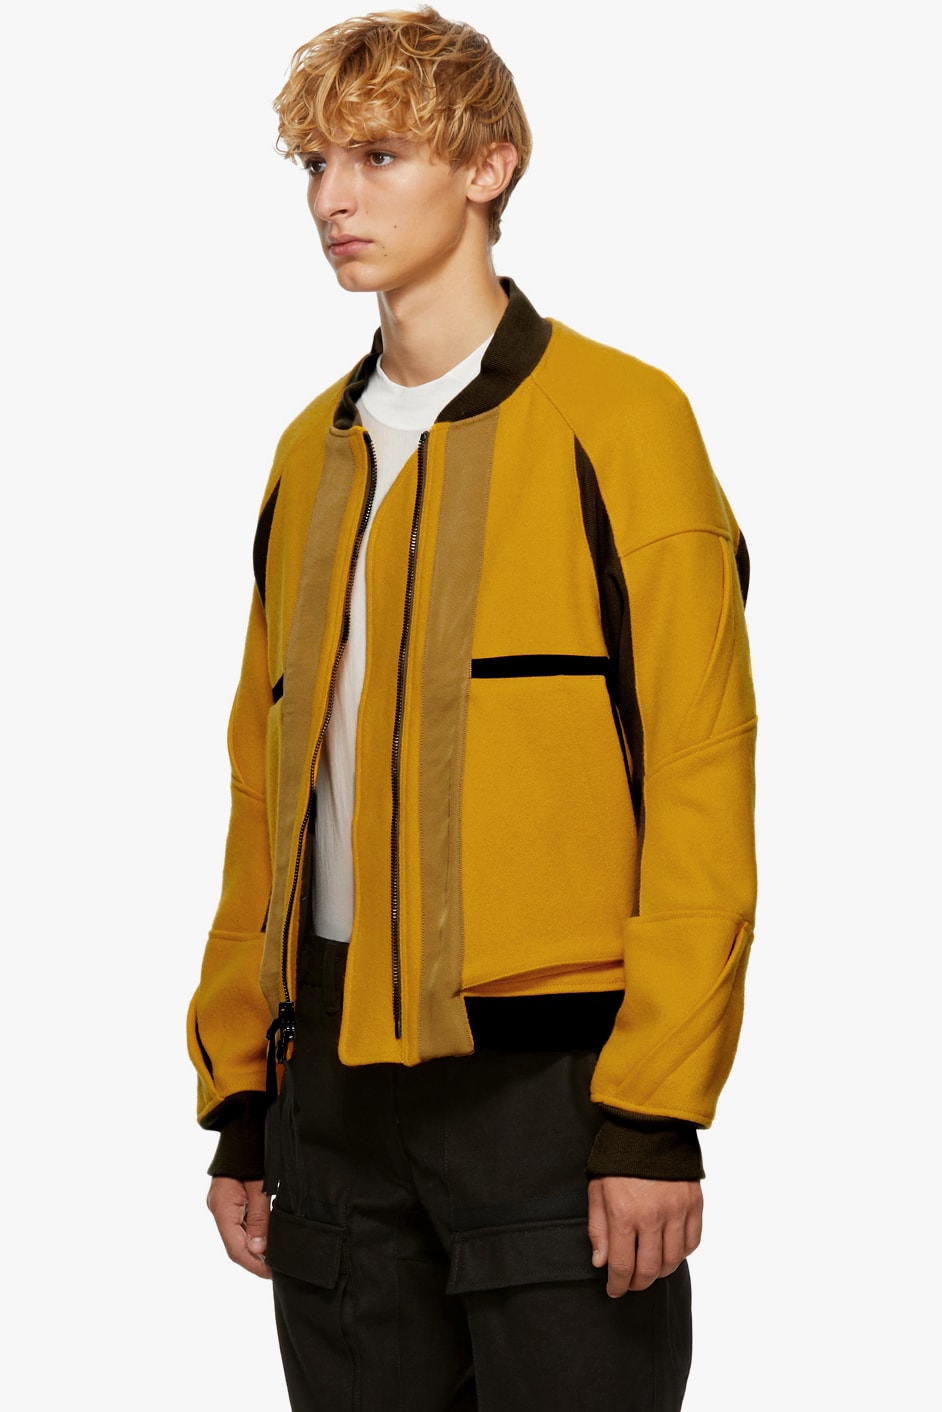 Abasi Rosborough fall winter 2018 ssense exclusive limited 10 pieces flight jacket yellow wool technical new york america outerwear